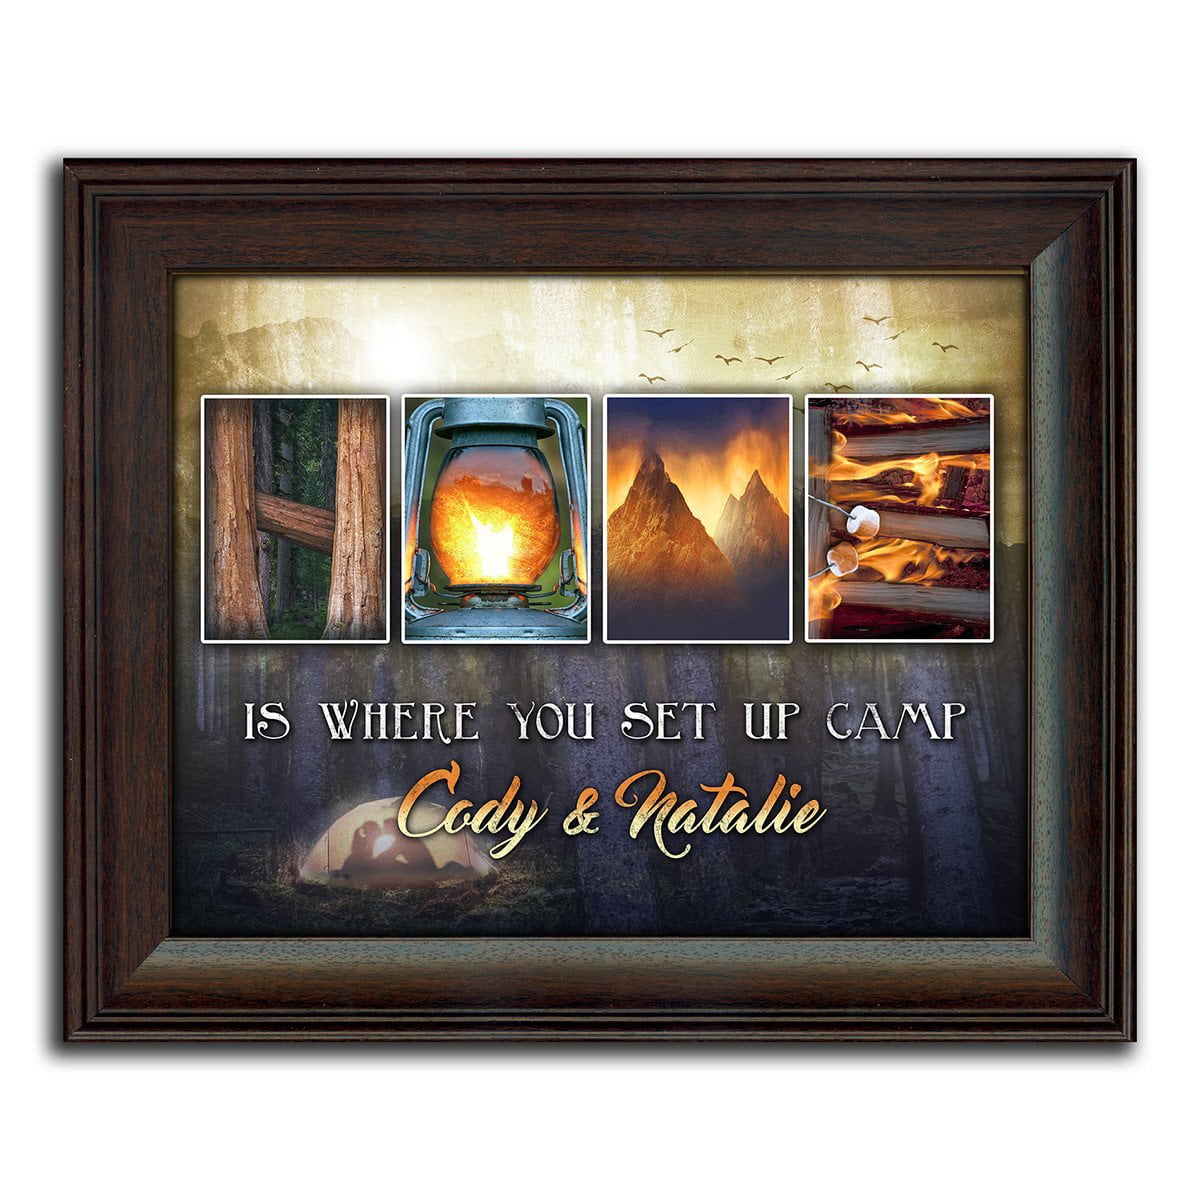 This camping-themed framed art piece uses photographs to spell the word HOME - Personal-Prints